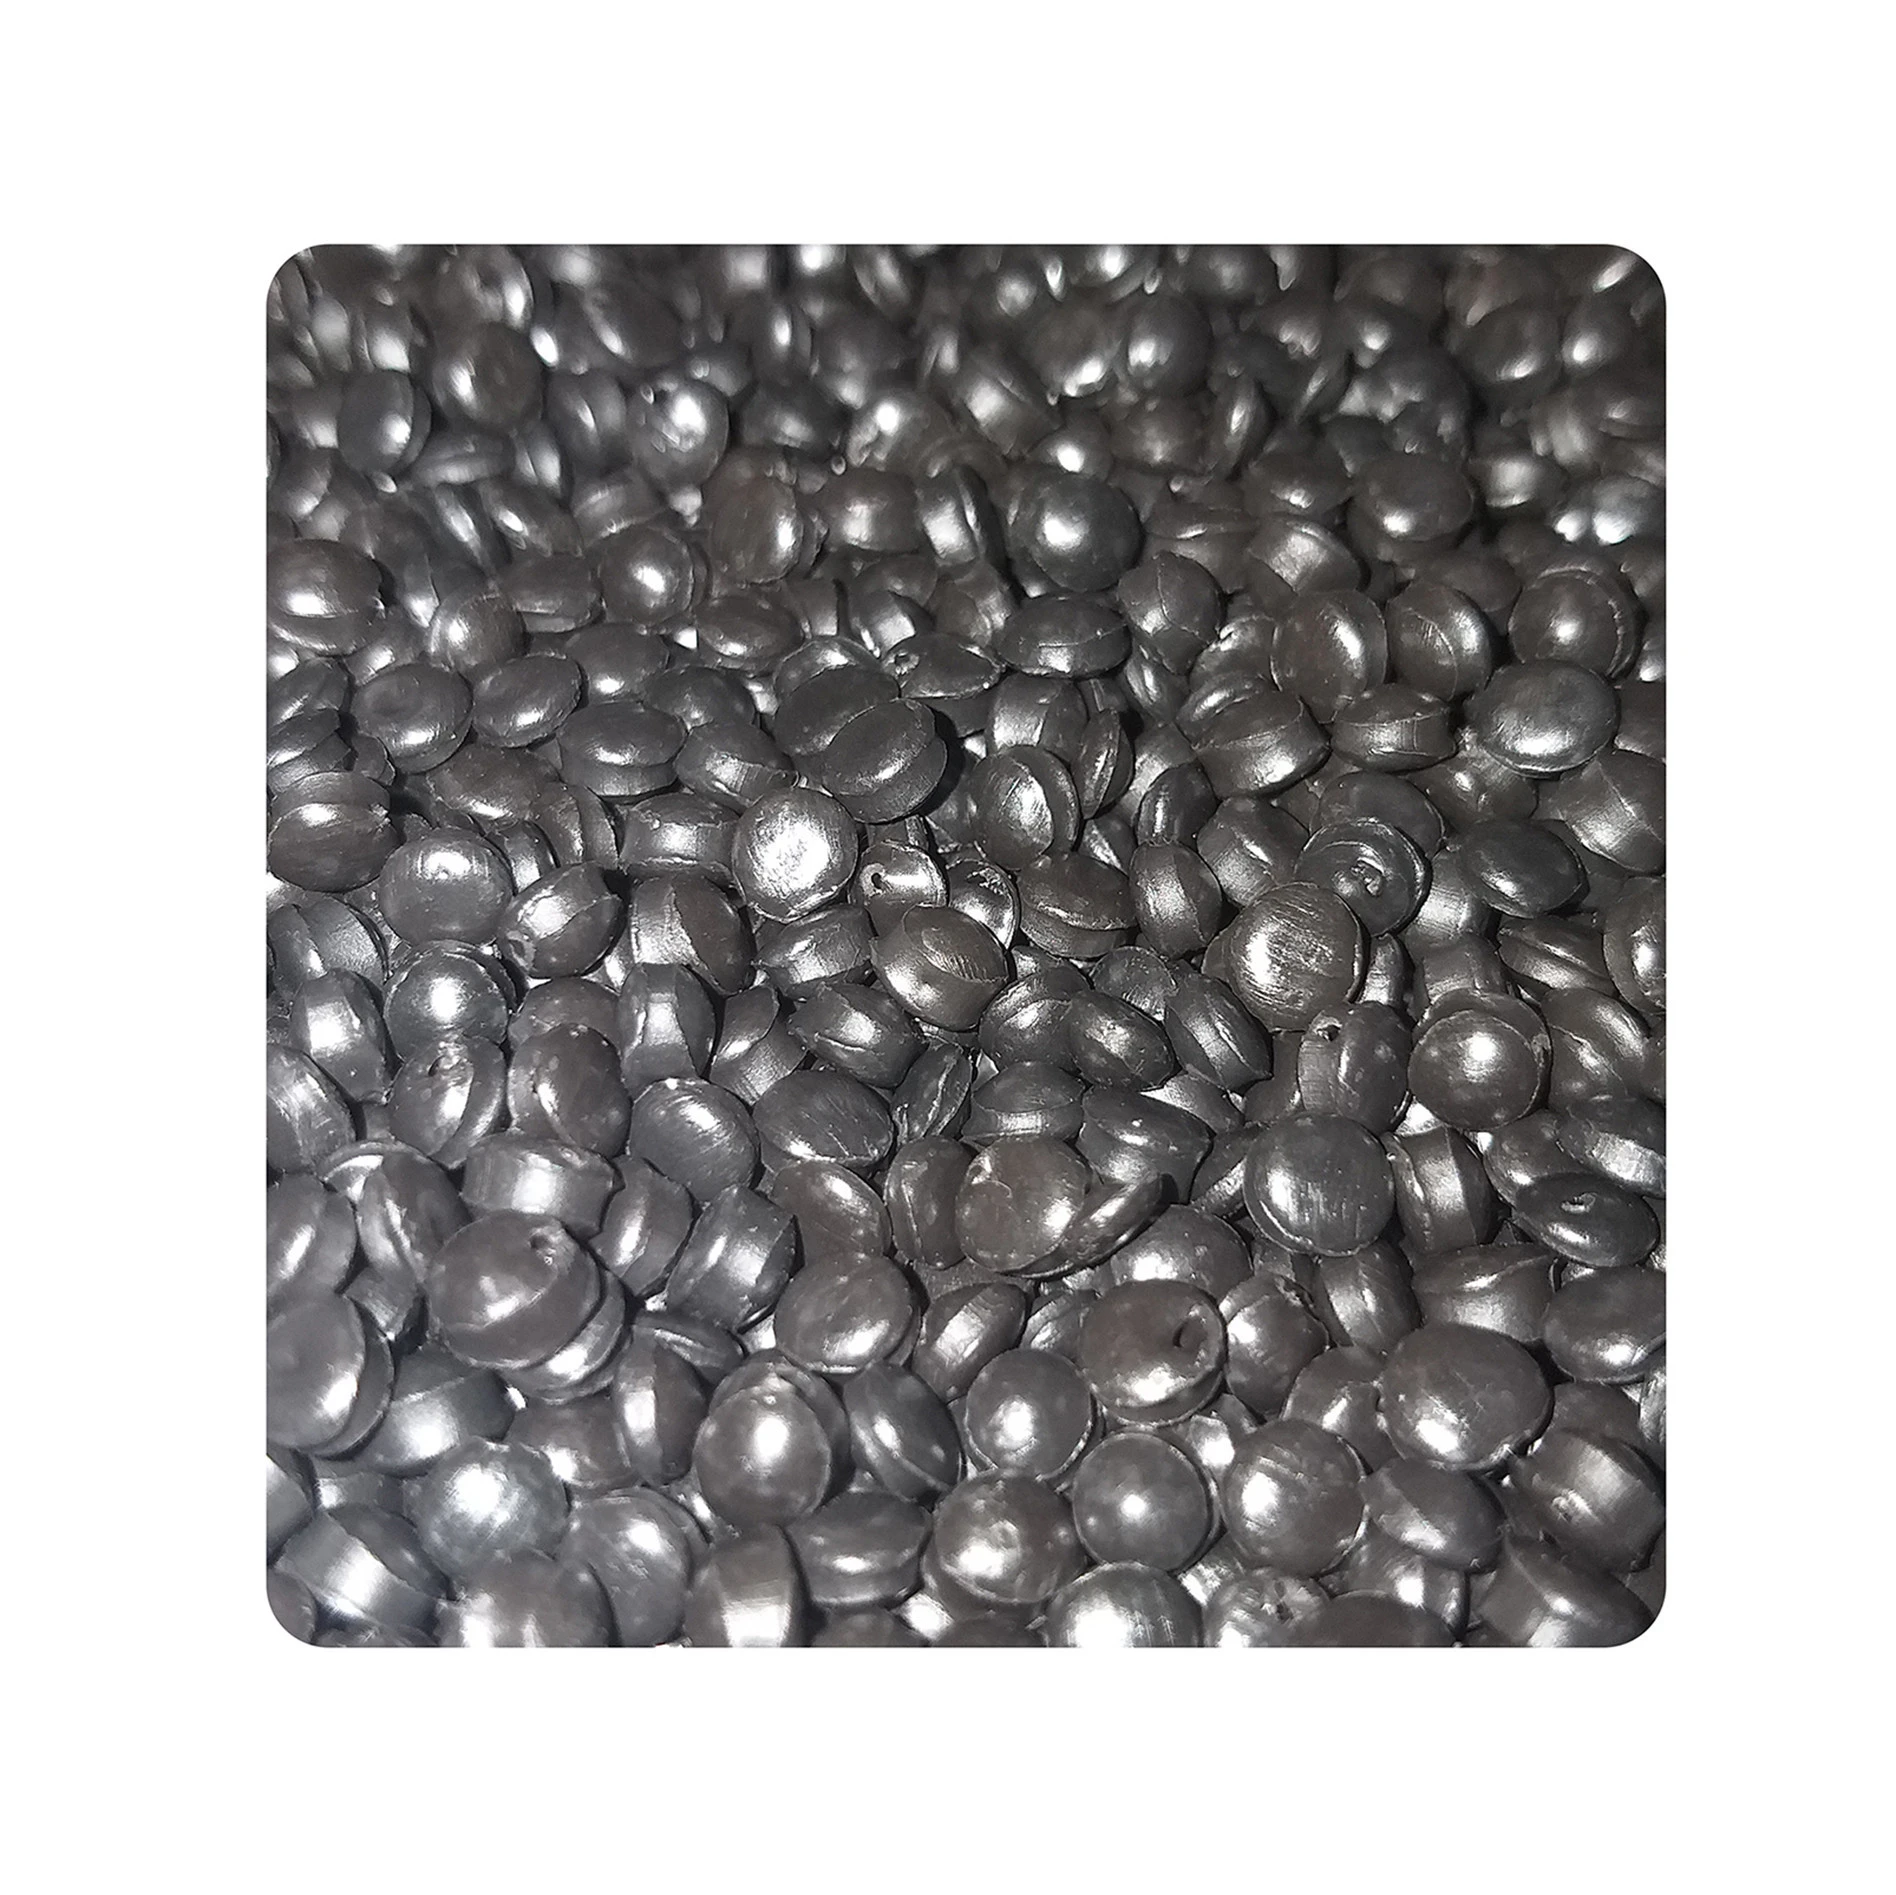 PP Polymer Granules from the Reliable Top-Rated Supplier, Raw Eco Material Made of Plastic Waste, Cheap Price and High Quality